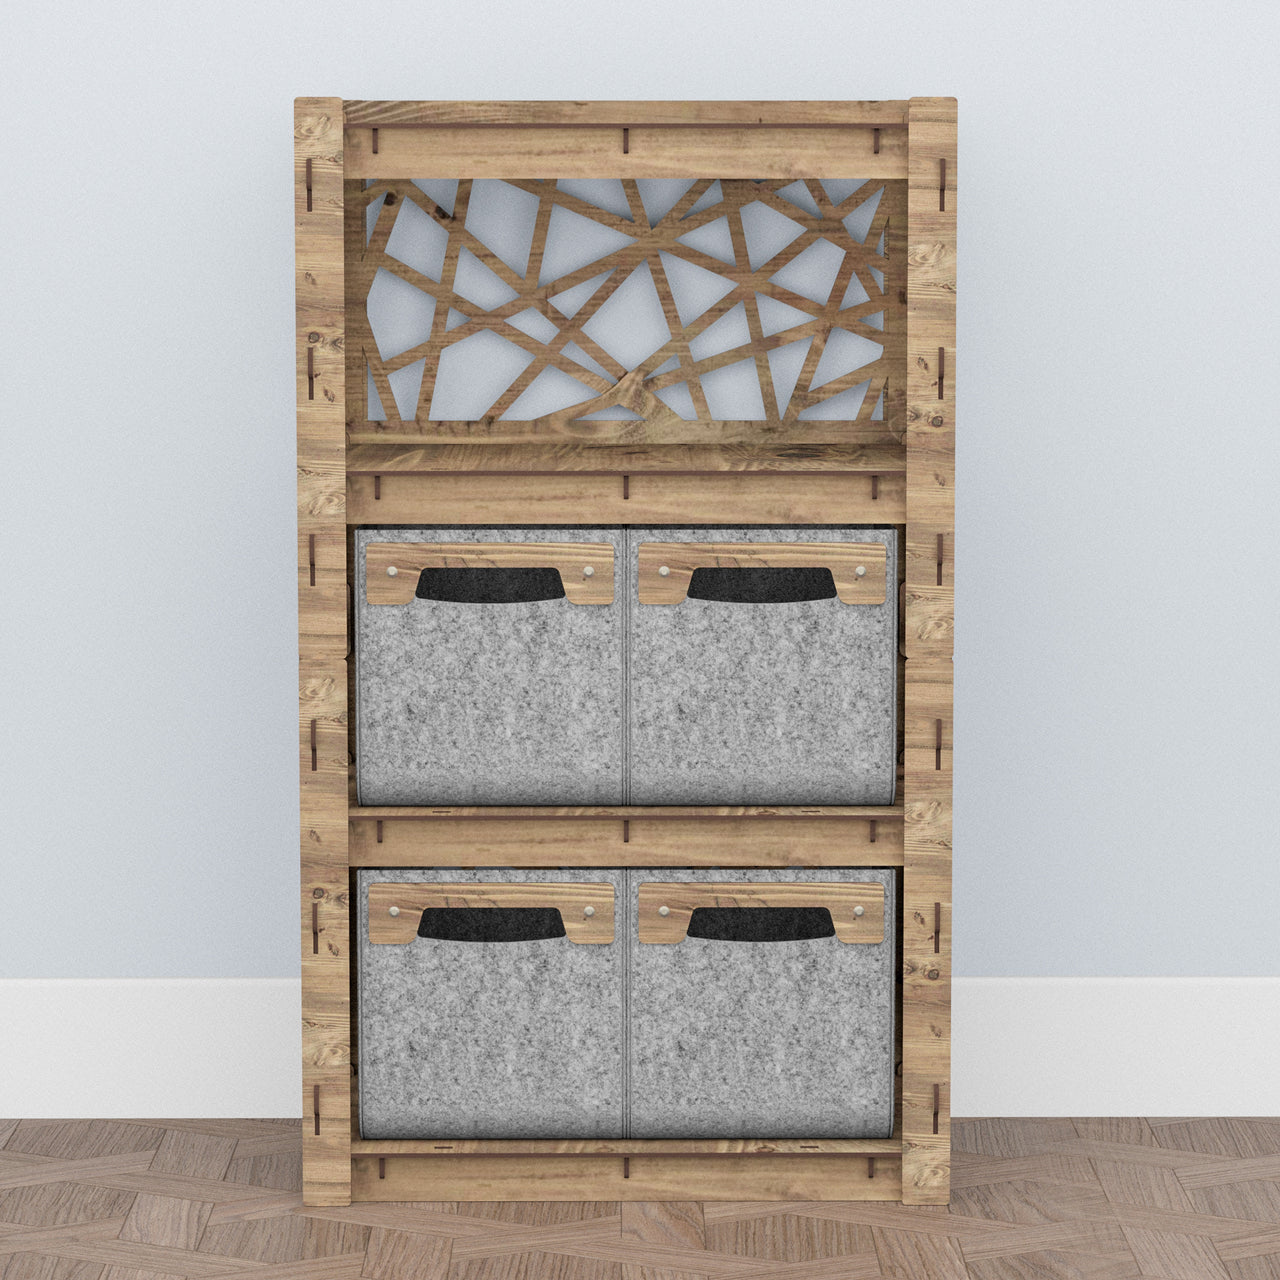 Crystals Chest Of 4 Drawers Storage Cabinet [4 SMALL GRAY BINS]